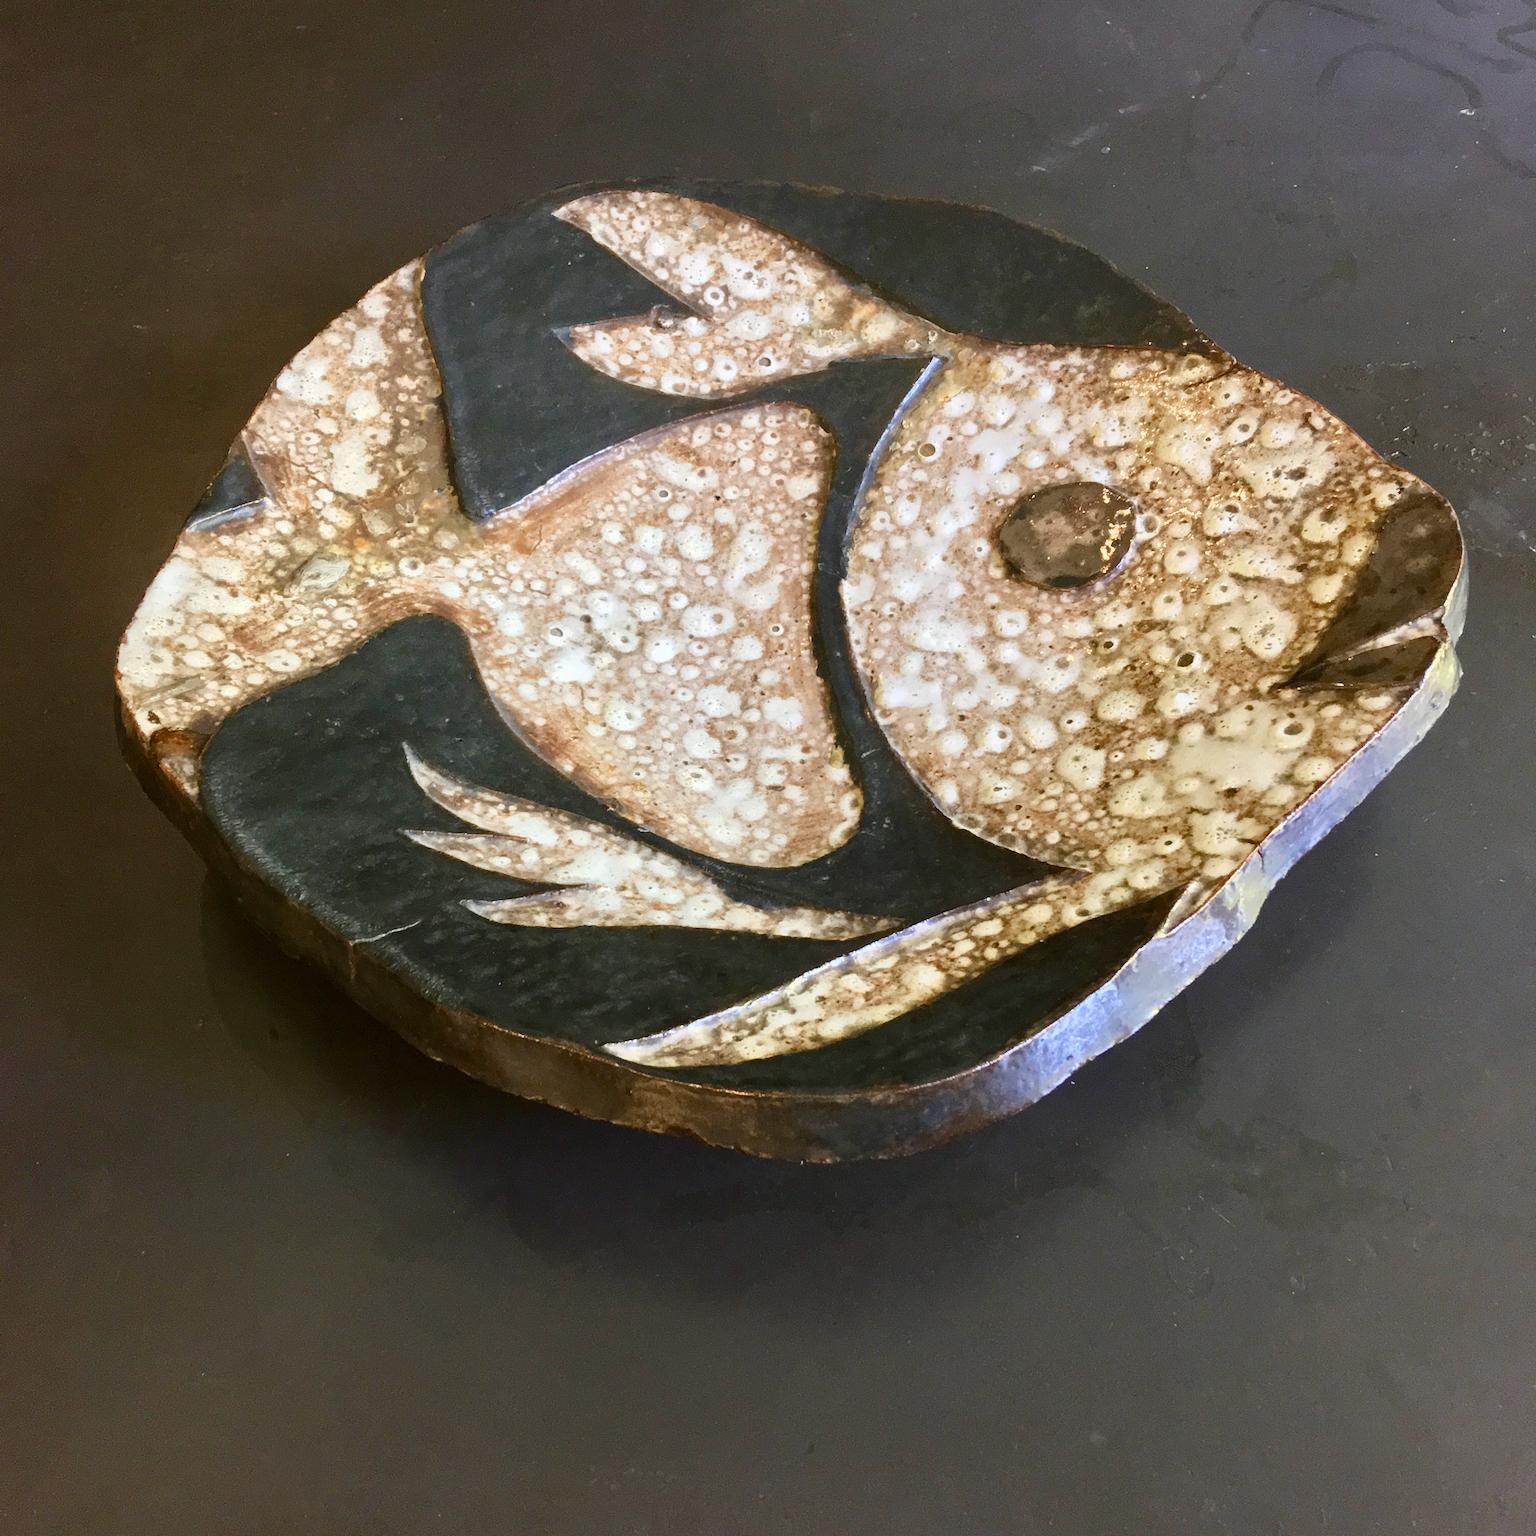 A large ceramic charger, with fish motif. Signed FAUFRA R 61 and attributed to the Belgian artist Roger Faufra (1926-2005), typically known for his landscape painting.

This is a nice heavy piece, with abstract form and bubble-textured glaze in